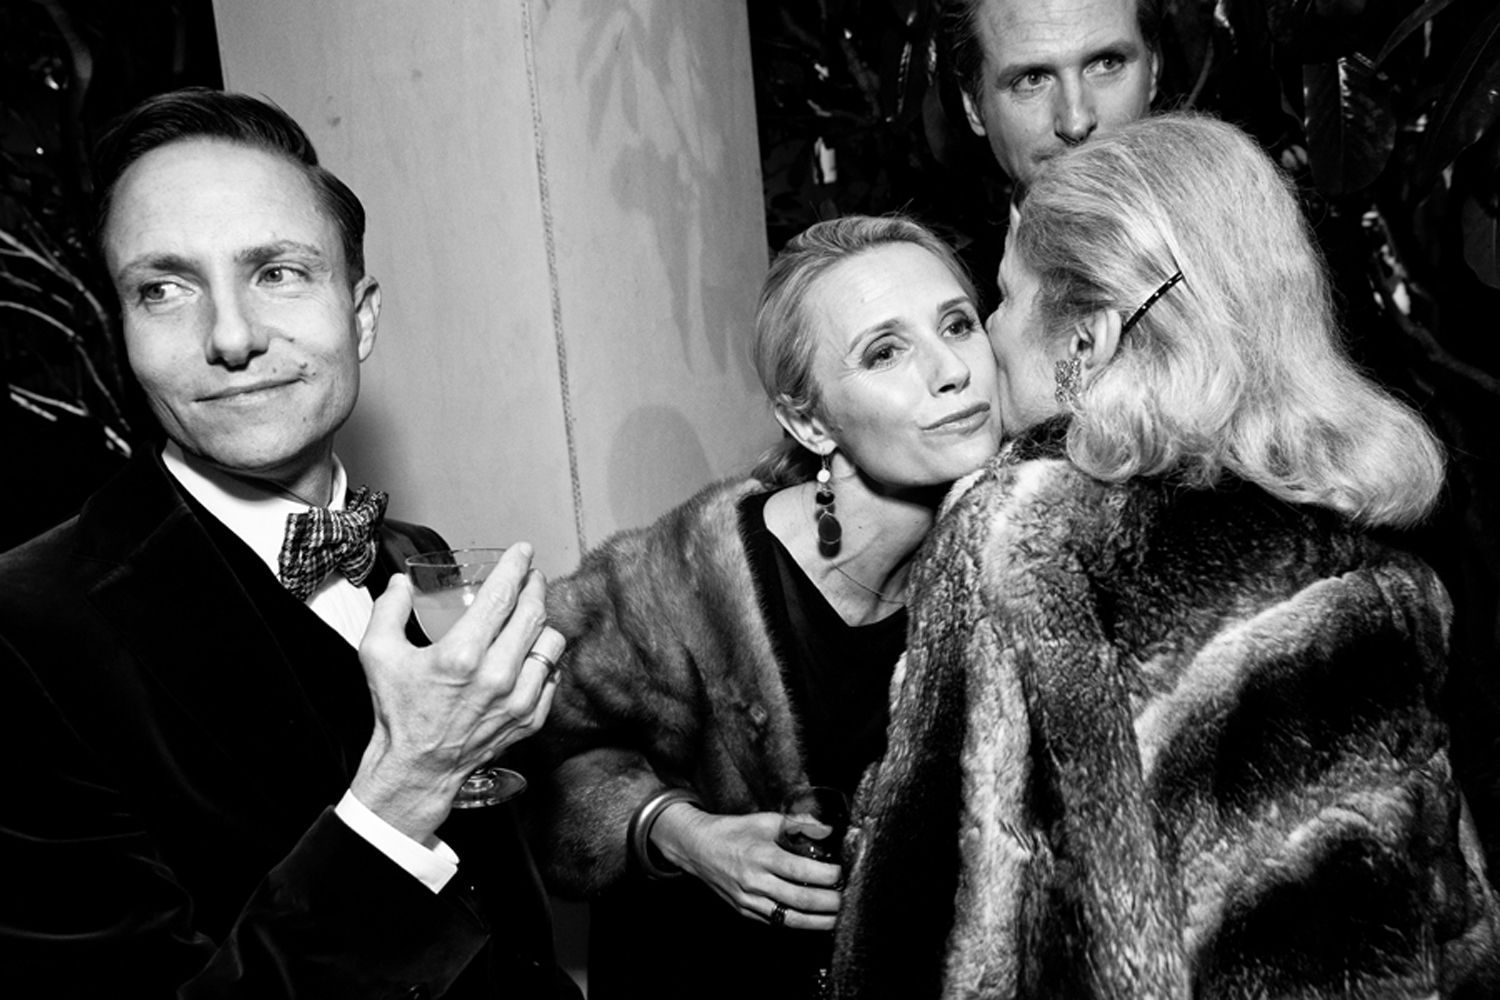 Documentary filmmaker Jennifer Siebel Newsom leans in to greet Denise Hale while attending Getty Oil heir Gordon Getty’s 80th birthday party with her husband California Lieutenant Governor Gavin Newsom (right) and interior designer Ken Fulk (left). The Getty’s threw the lavish party at their home and invited an estimated 600 guests to the festivities. From the series The Social Stage, 2013CREDIT: Laura Morton